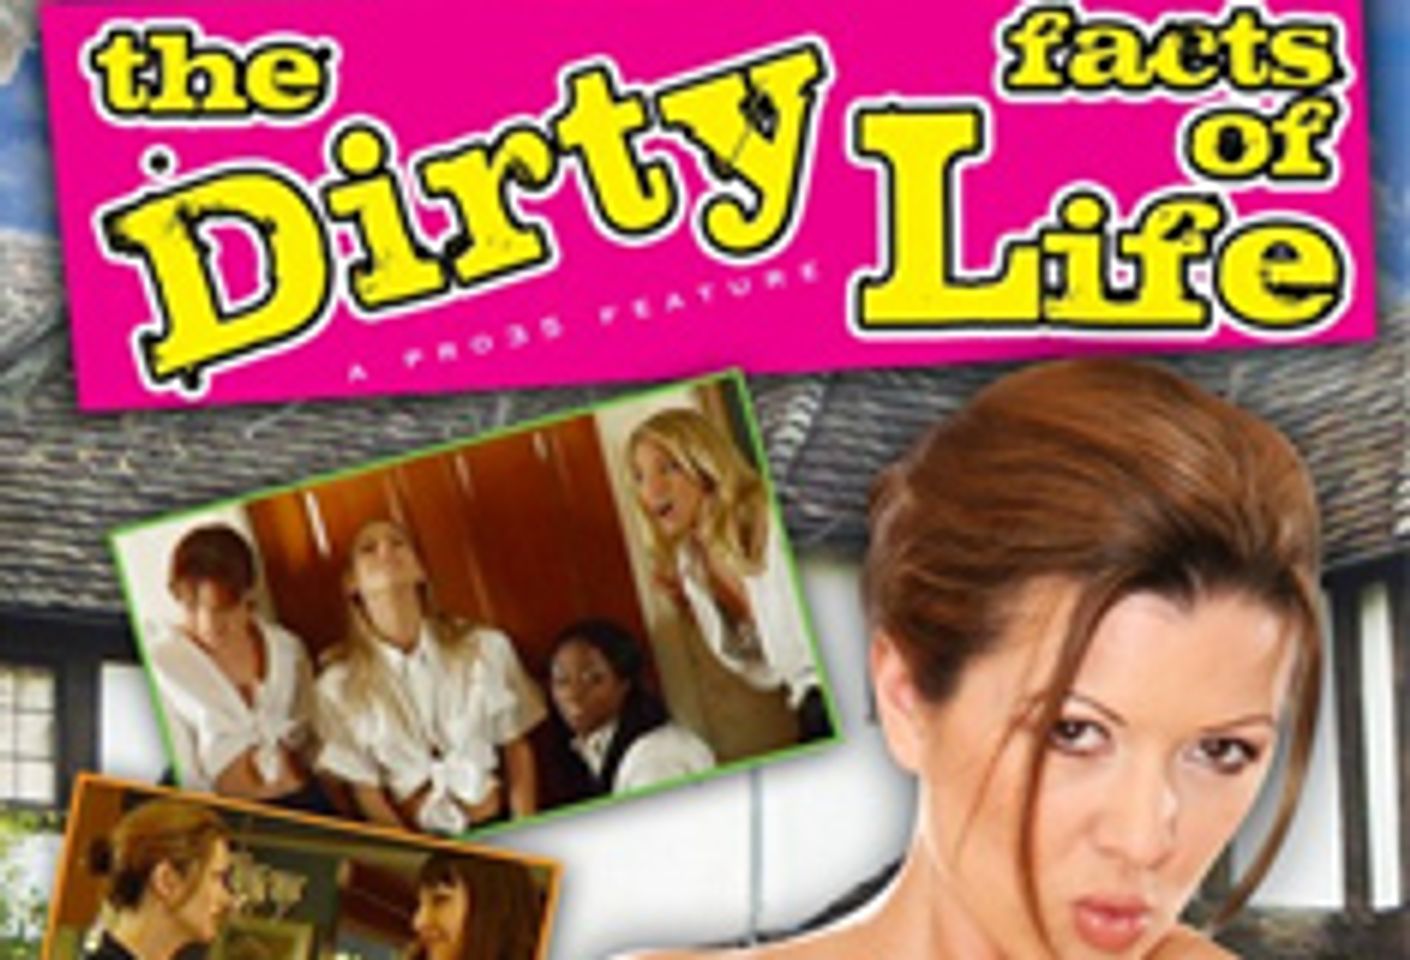 Abigail Productions Presents Lesbian 'Facts of Life' Spoof